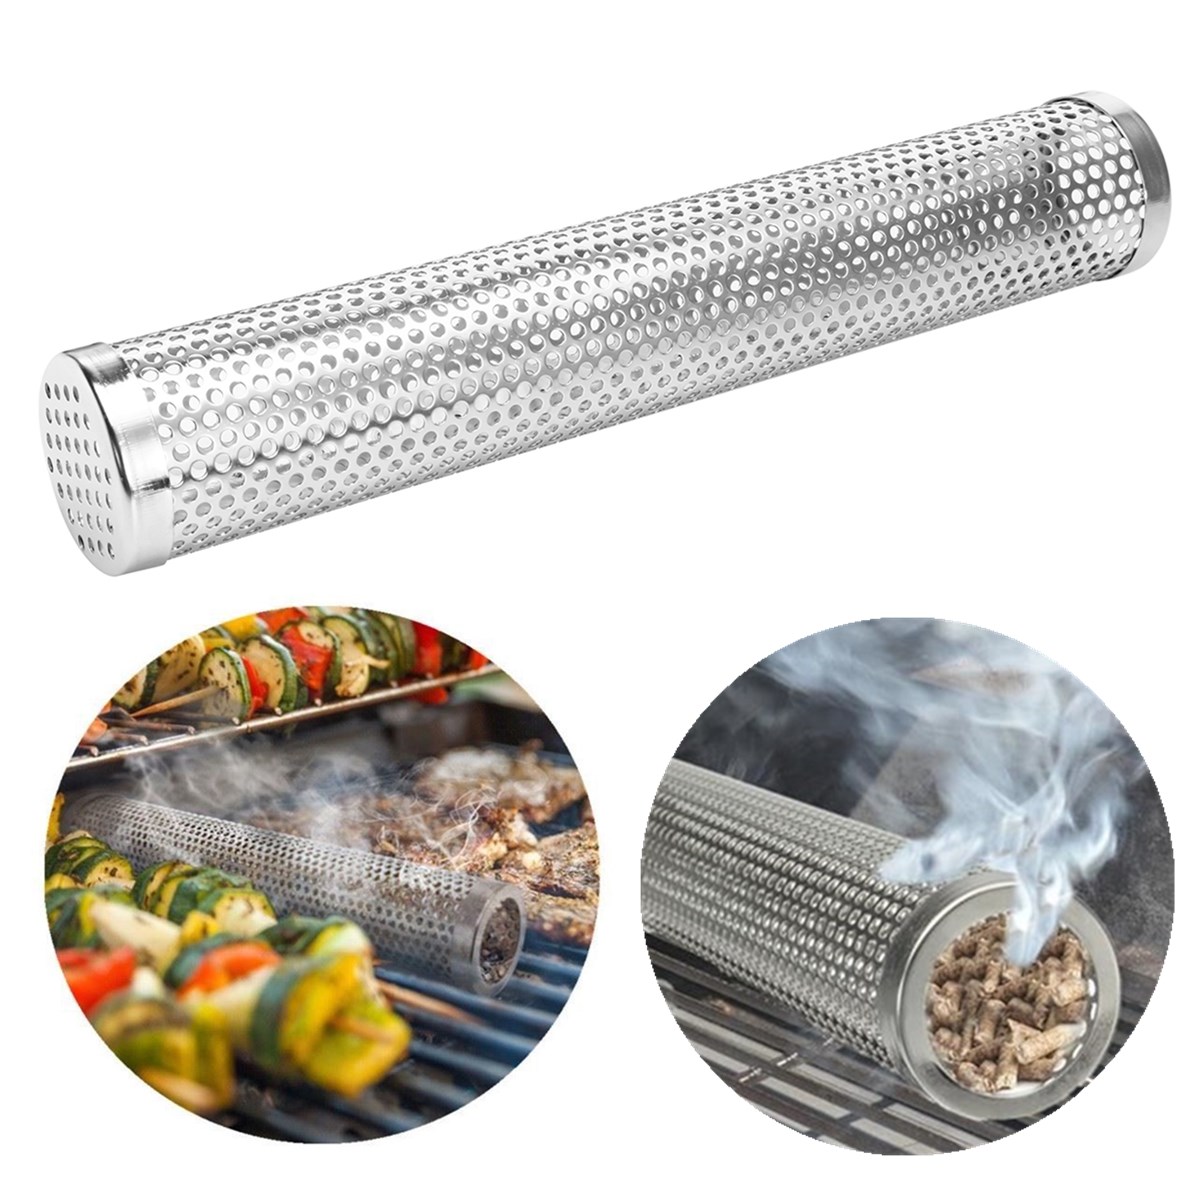 

12 Inch BBQ Smoker Tube Stainless Steel Filter Gadget Camping Cooking BBQ Tools Accessories